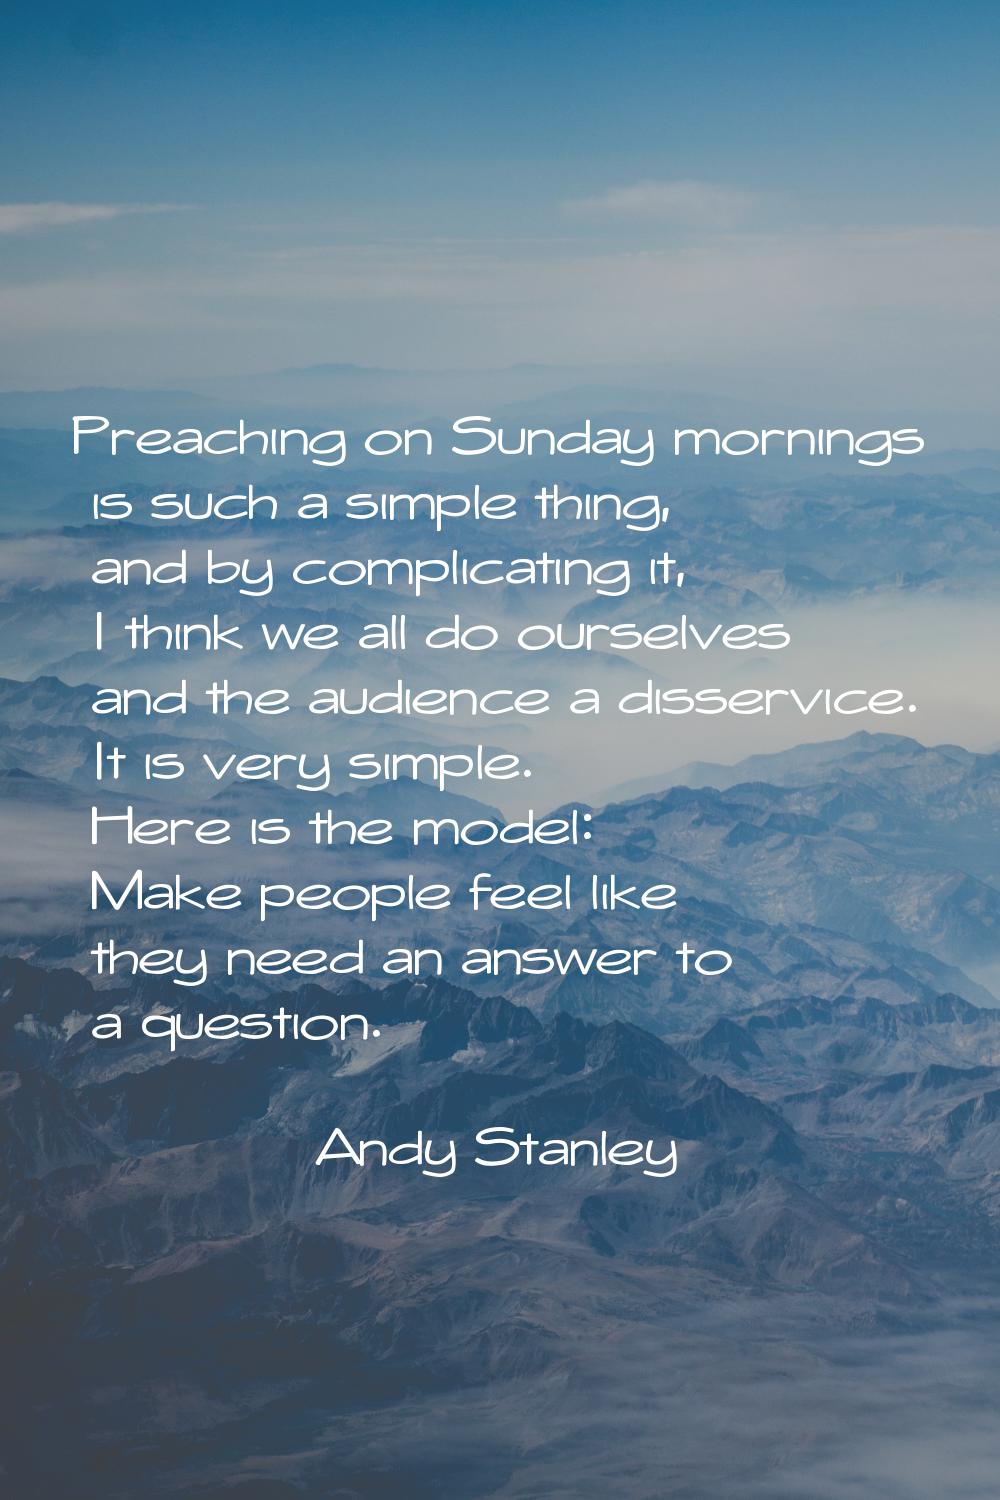 Preaching on Sunday mornings is such a simple thing, and by complicating it, I think we all do ours